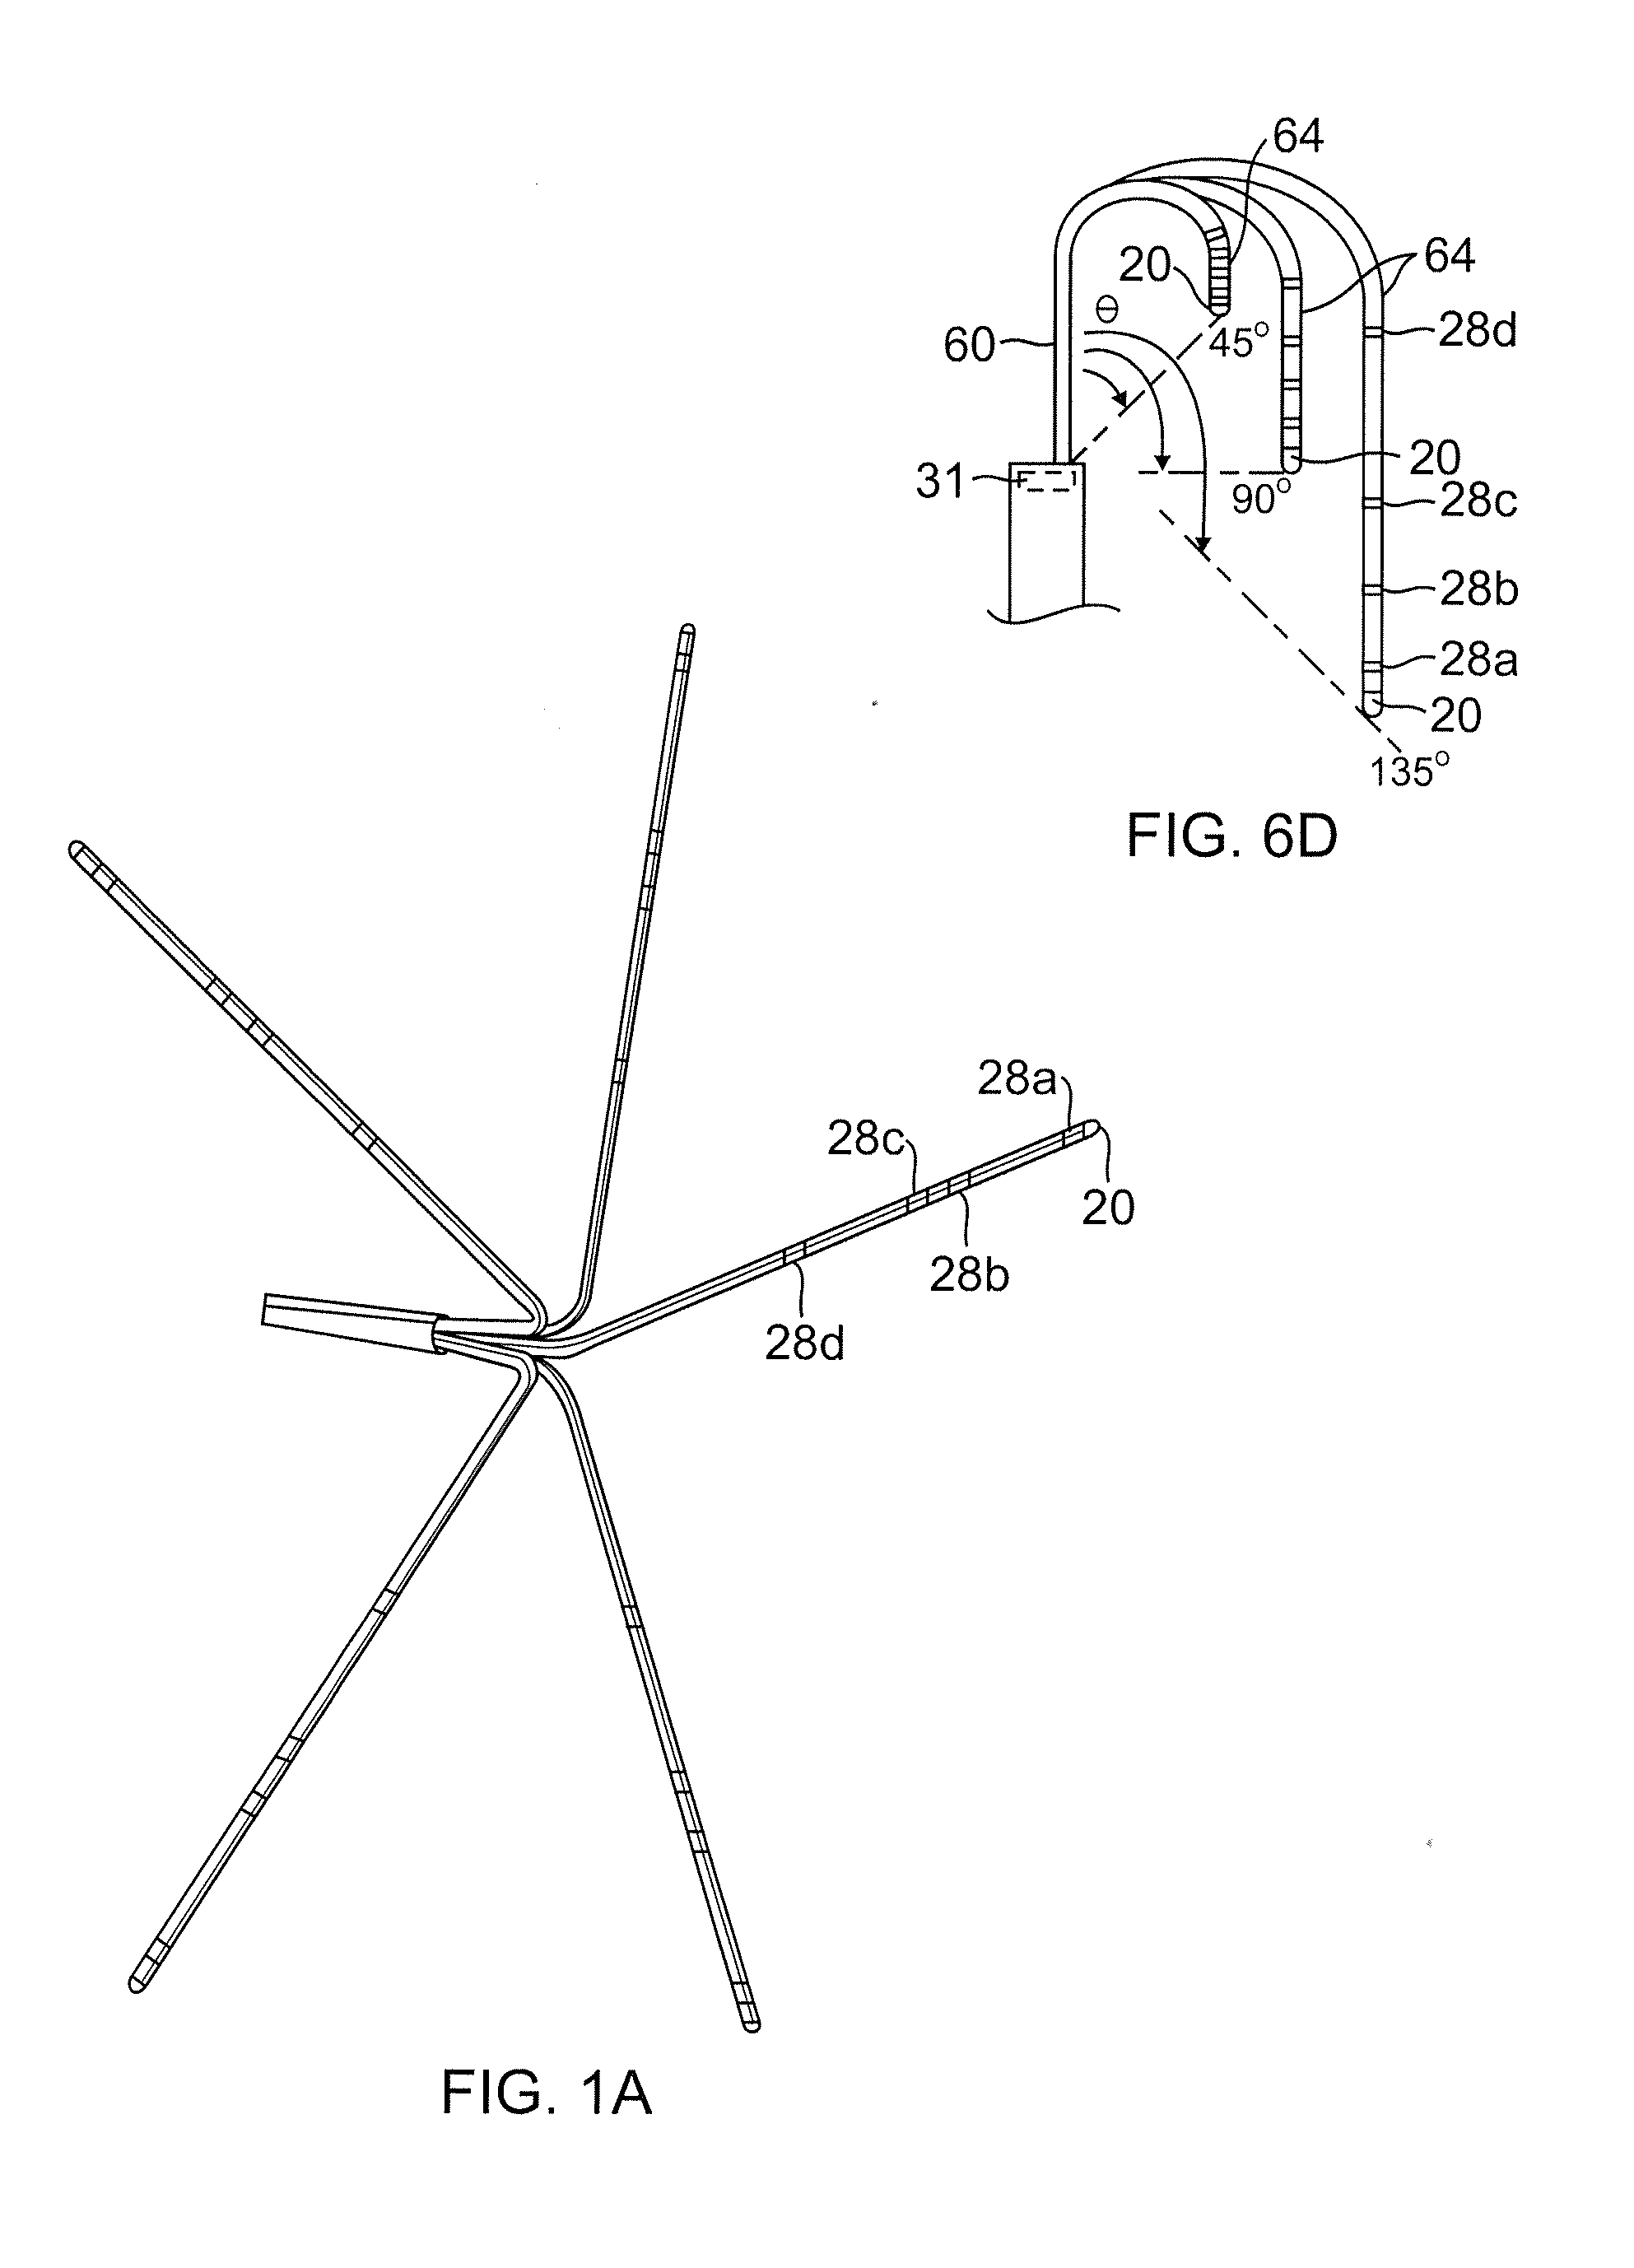 Flower catheter for mapping and ablating veinous and other tubular locations